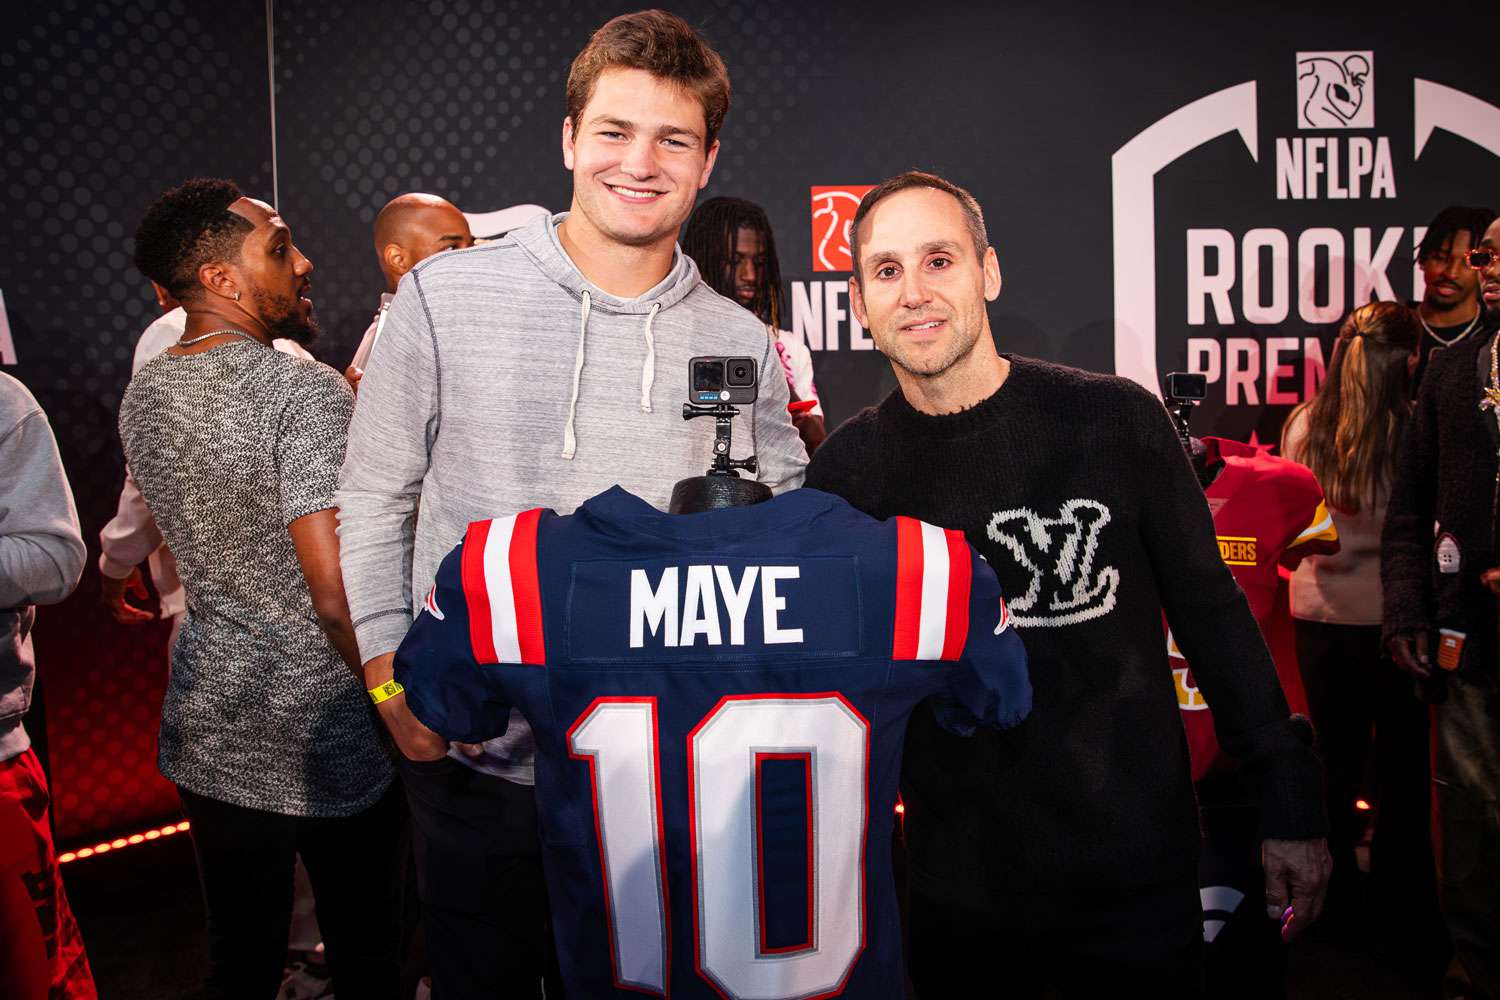 Inside Michael Rubin's Inspiring Weekend with NFL Rookies – Including Advice from Tom Brady and JAY-Z